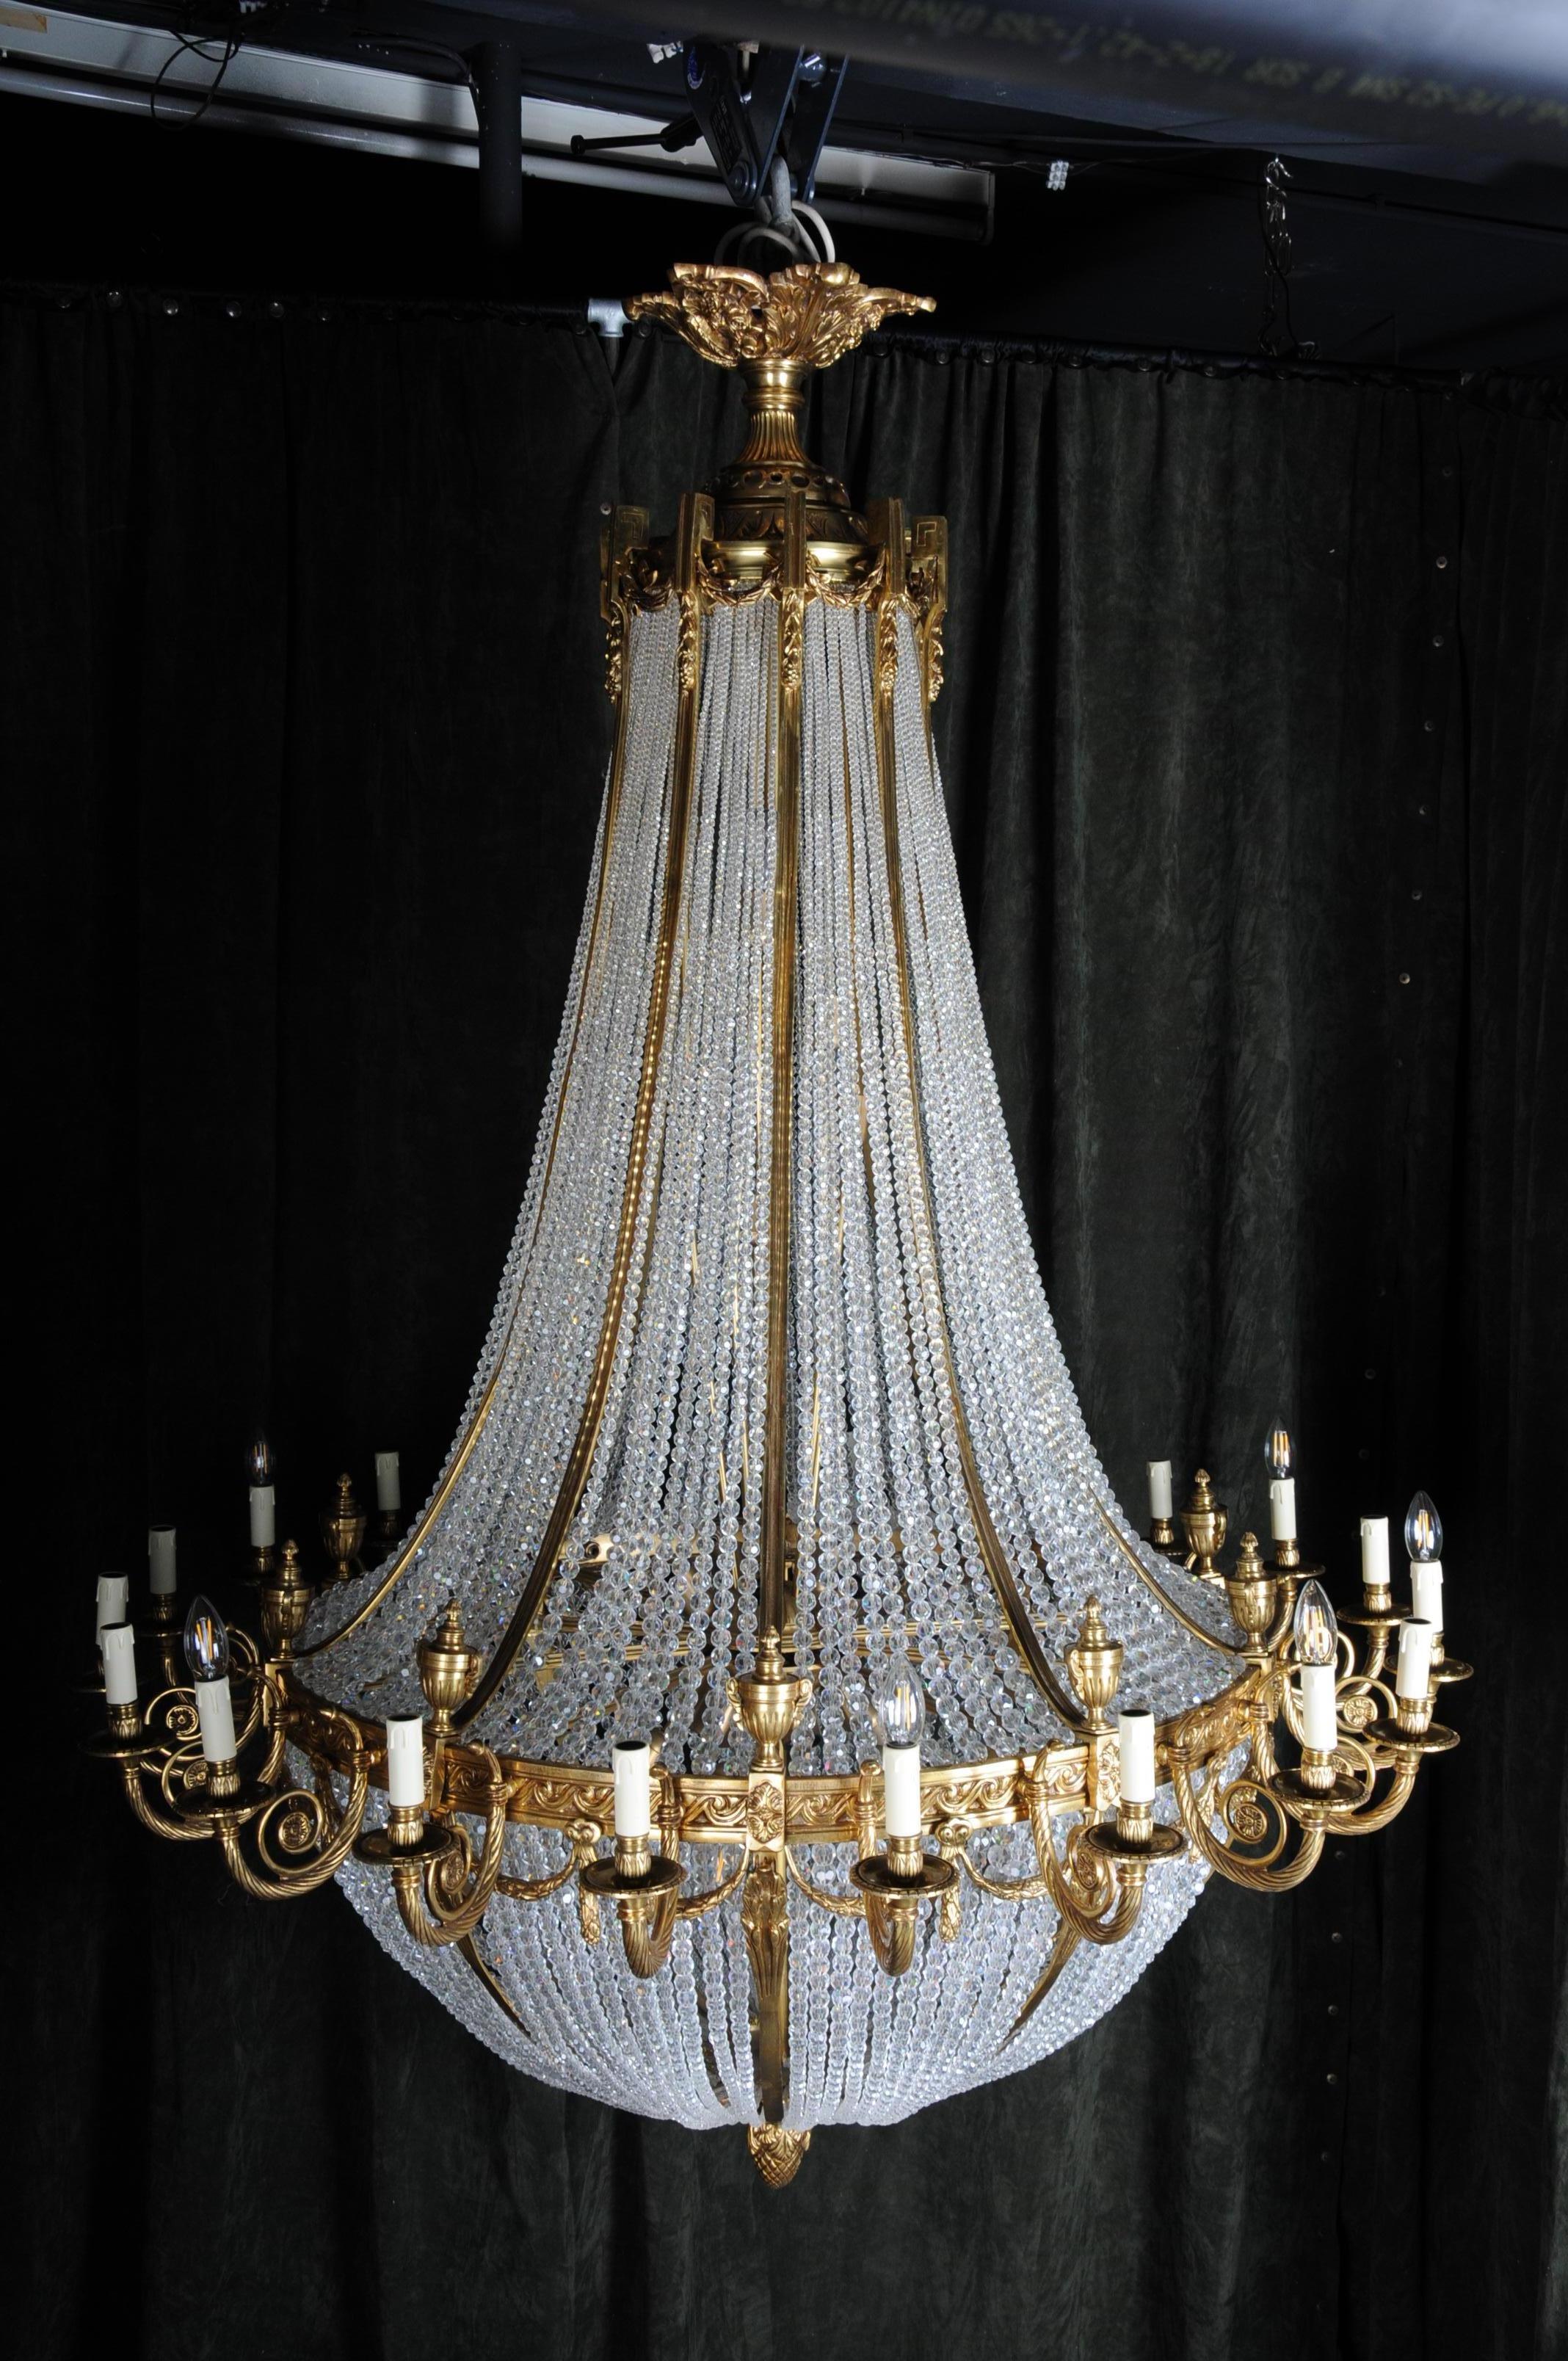 Monumental, noble ceiling chandelier in the Louis-Seize style

Engraved Bronze. Connected through ornamental, reliefed
hoop. Basket-formed corpus from hand-cut frenches ball prisms. Connected through wide, ornamental reliefed and broken hoops. There